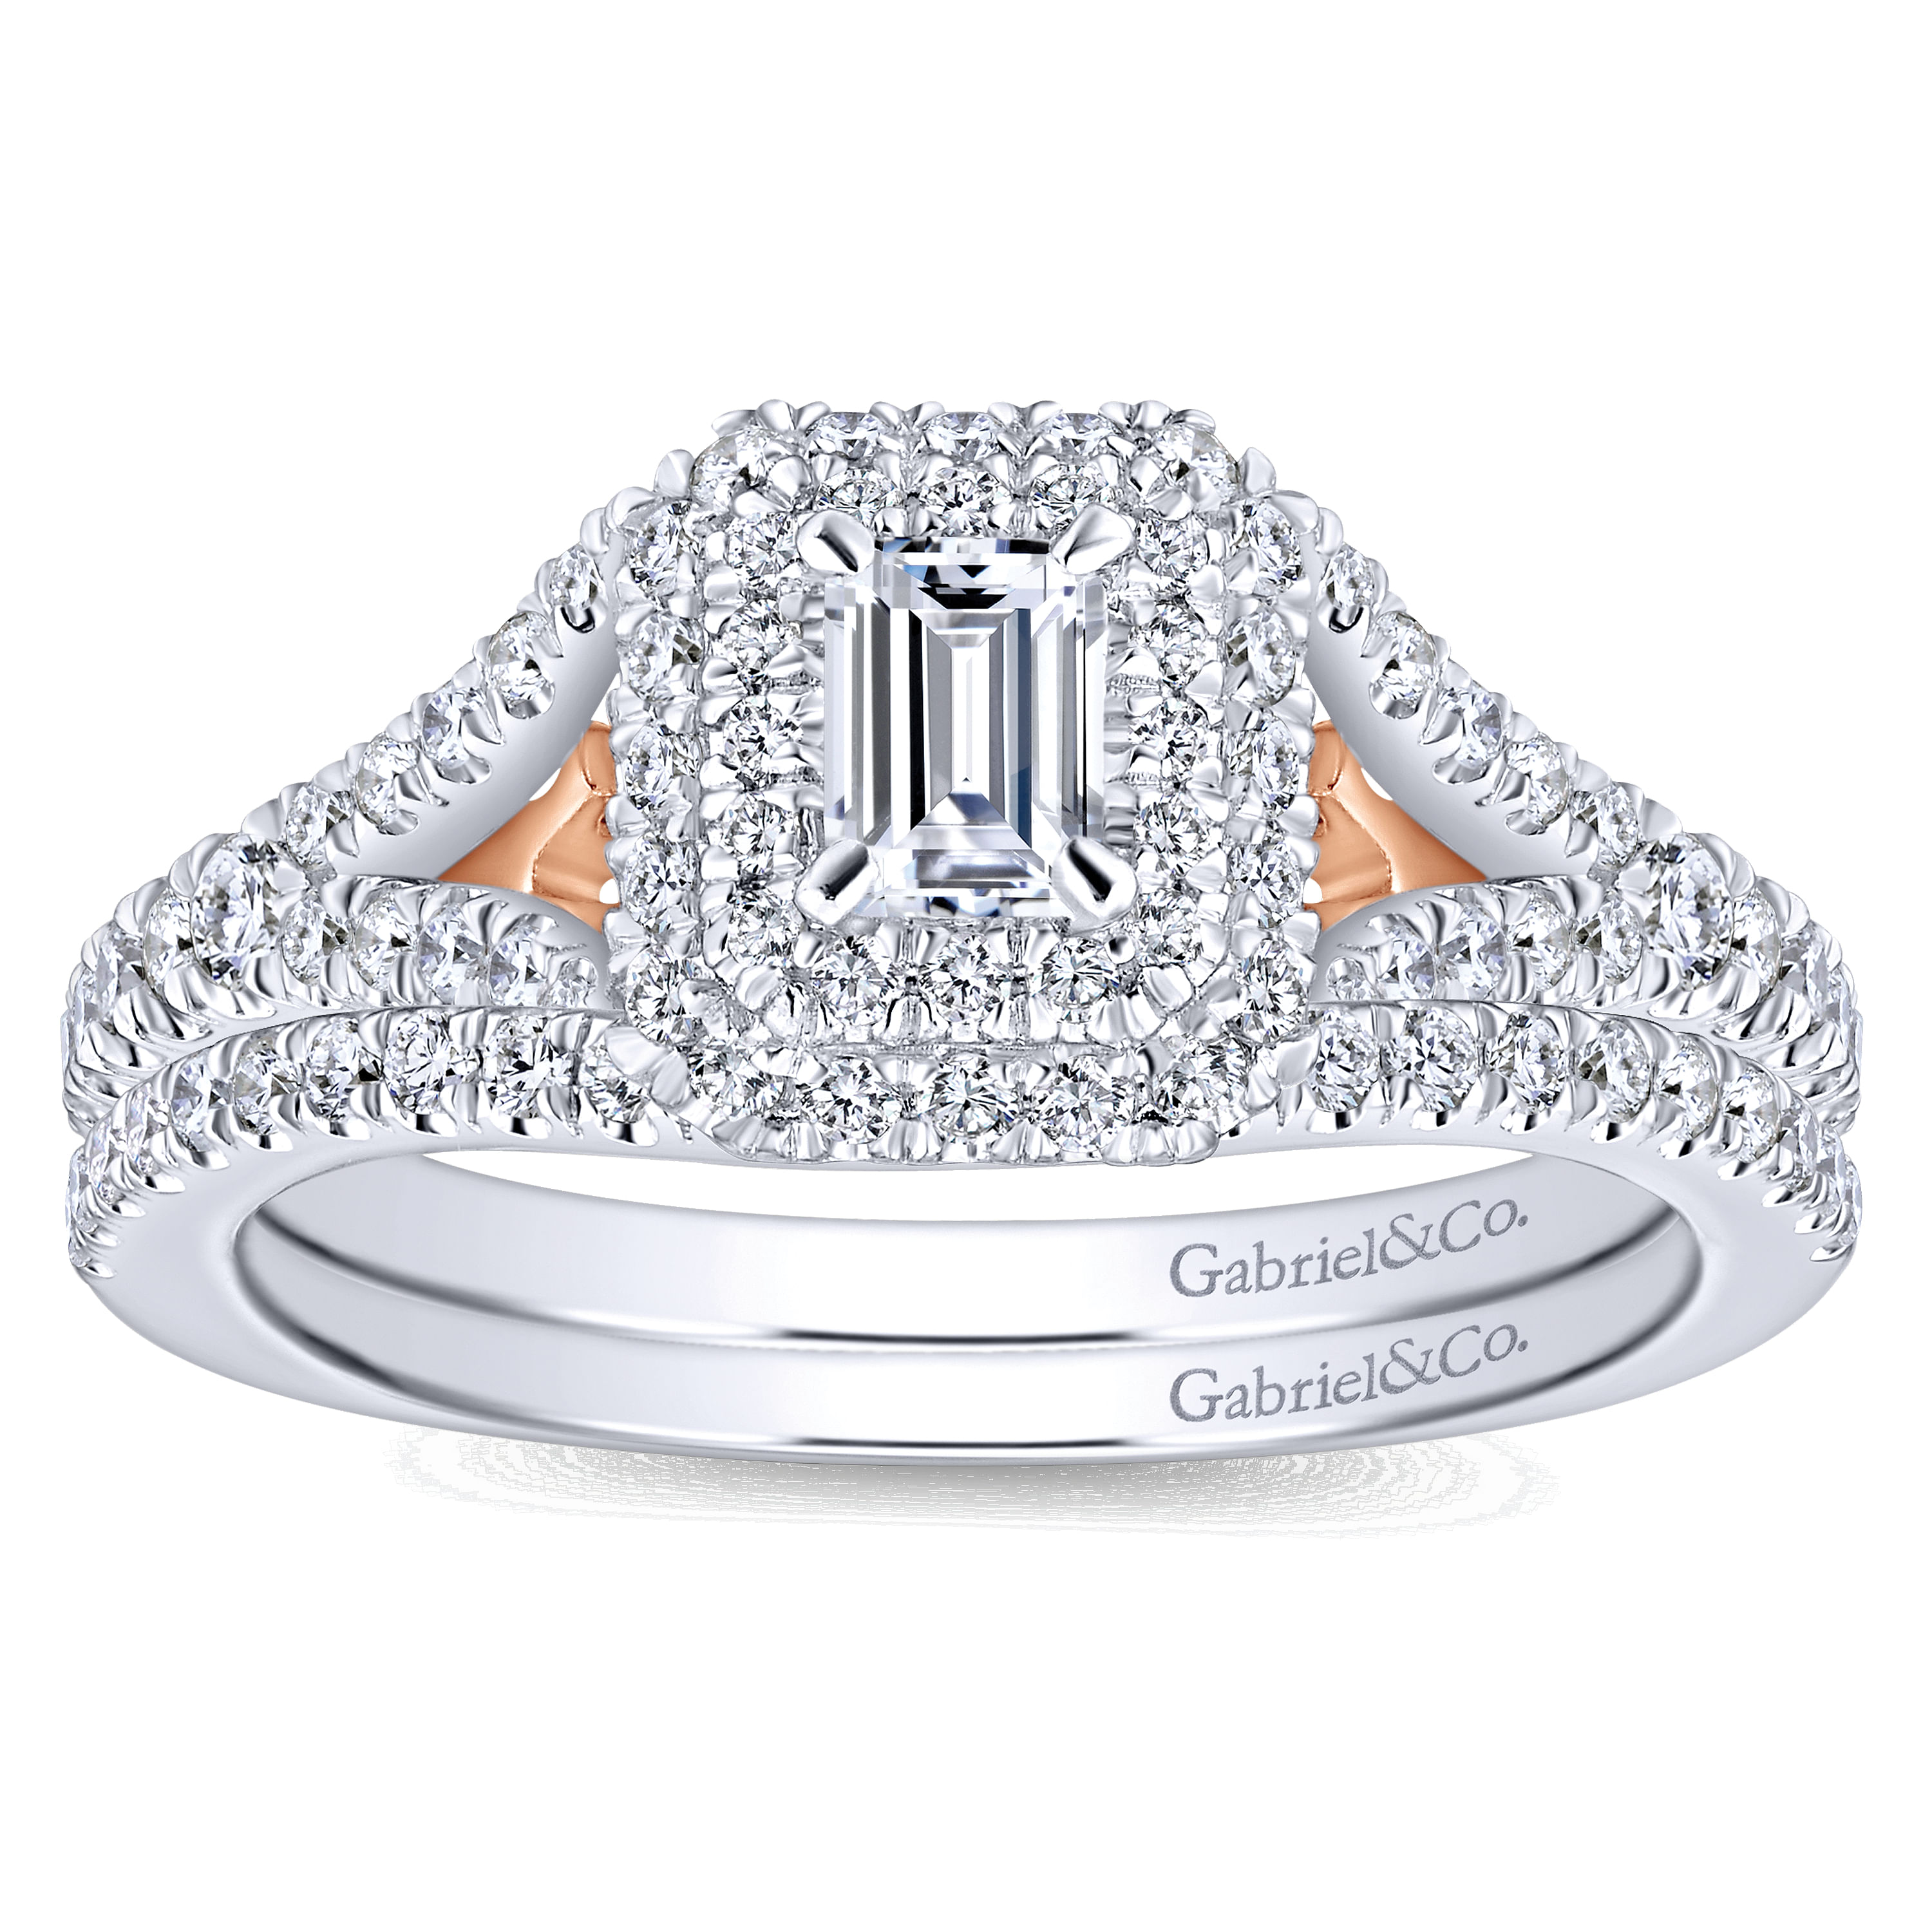 14K White-Rose Gold Emerald Cut Complete Diamond Engagement Ring